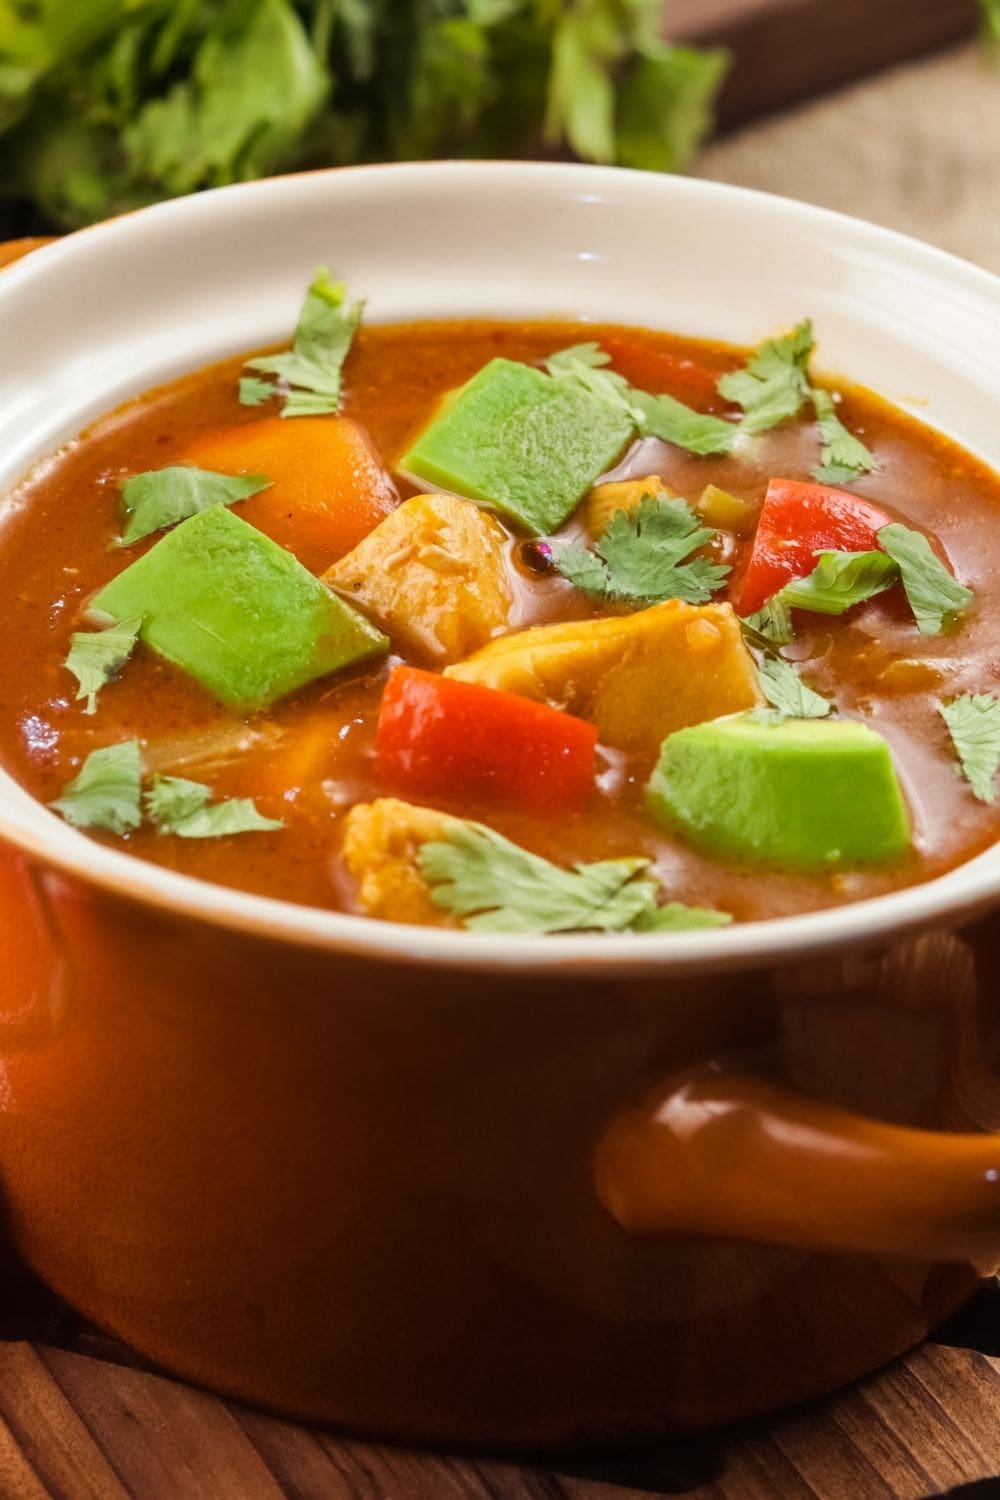 20 Keto Soup Recipes to Warm You Up - Insanely Good